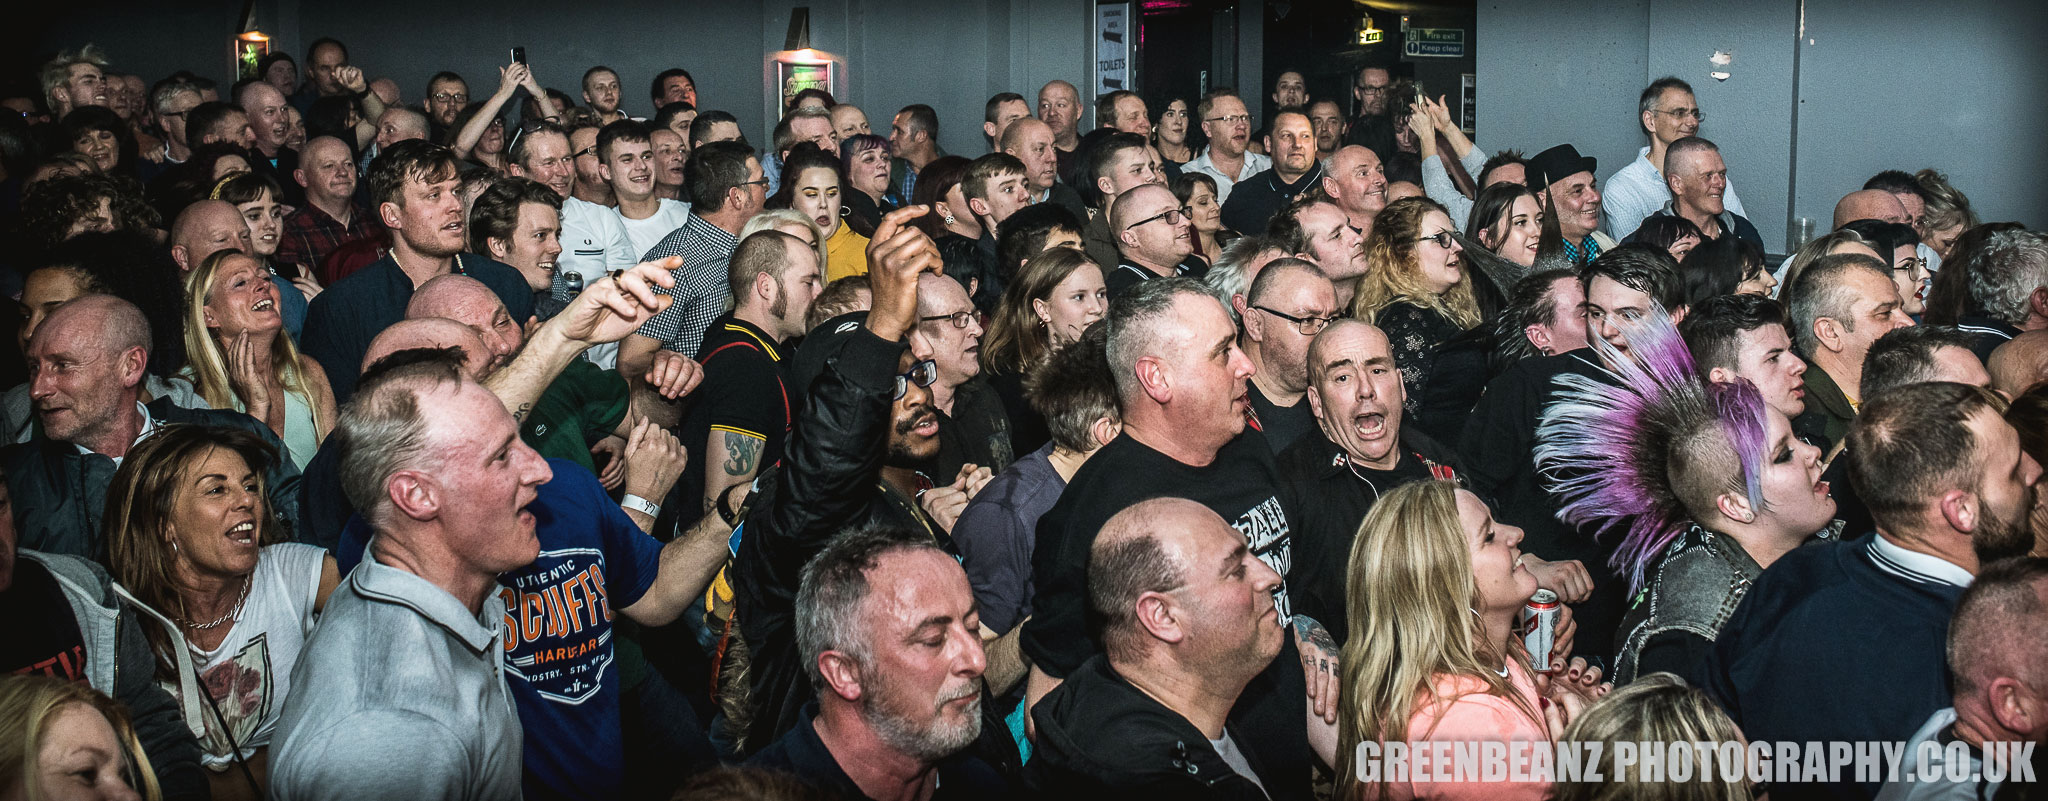 UK Ska Fans skanking to Bad Manners at Plymouth's Hub in 2018